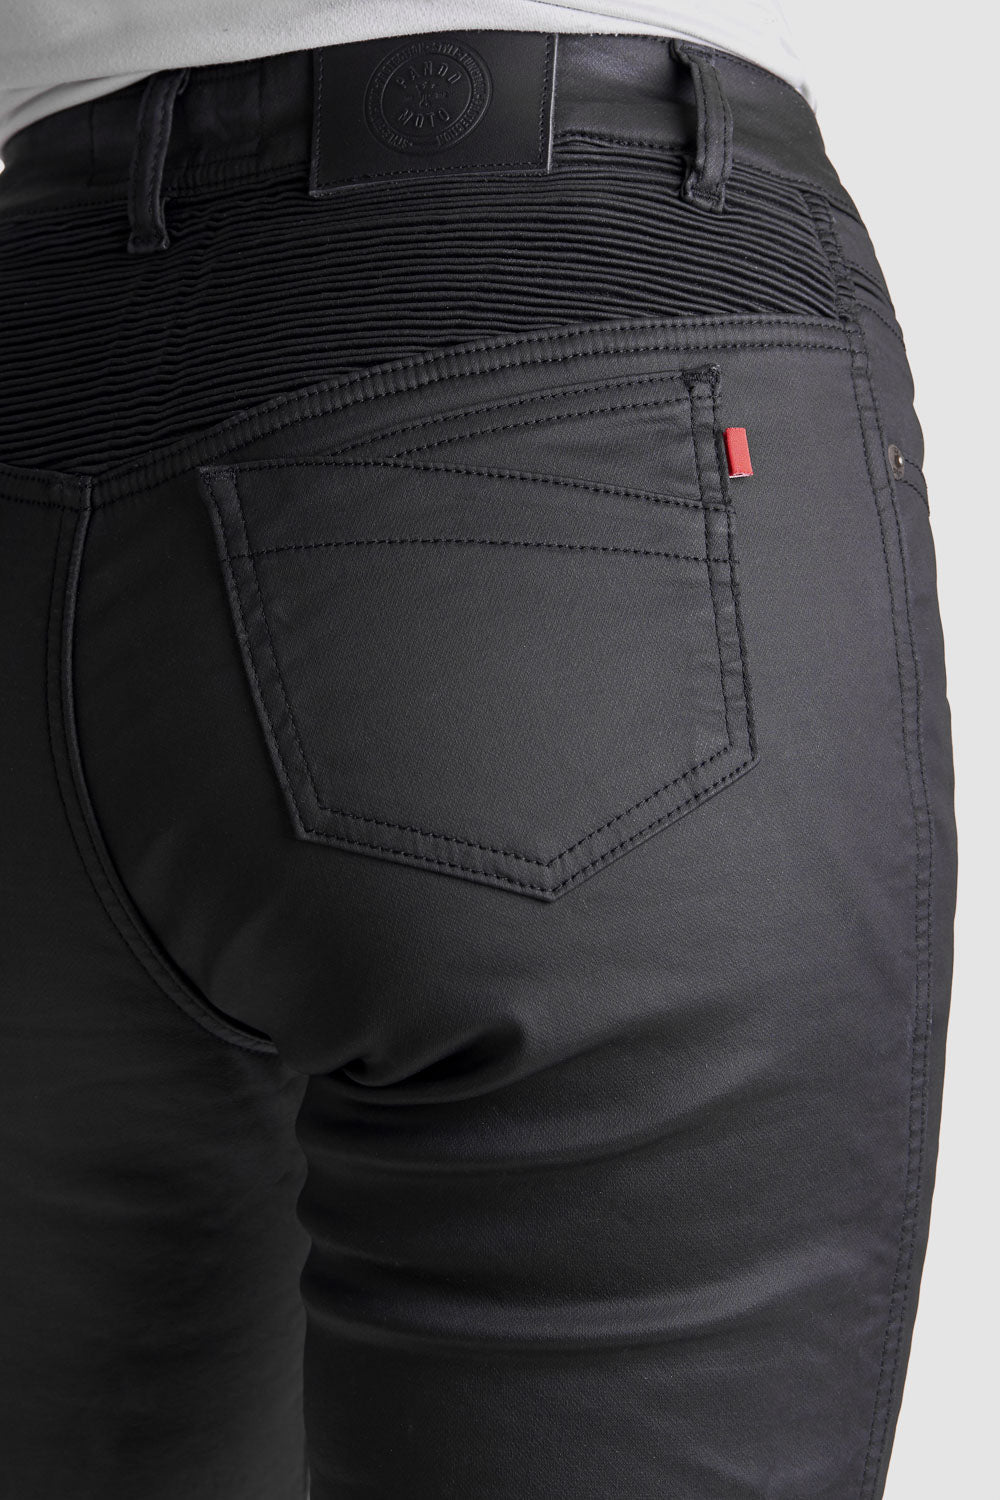 The bottom of a woman wearing women's black motorcycle jeans Lorica Kevlar from Pando Moto